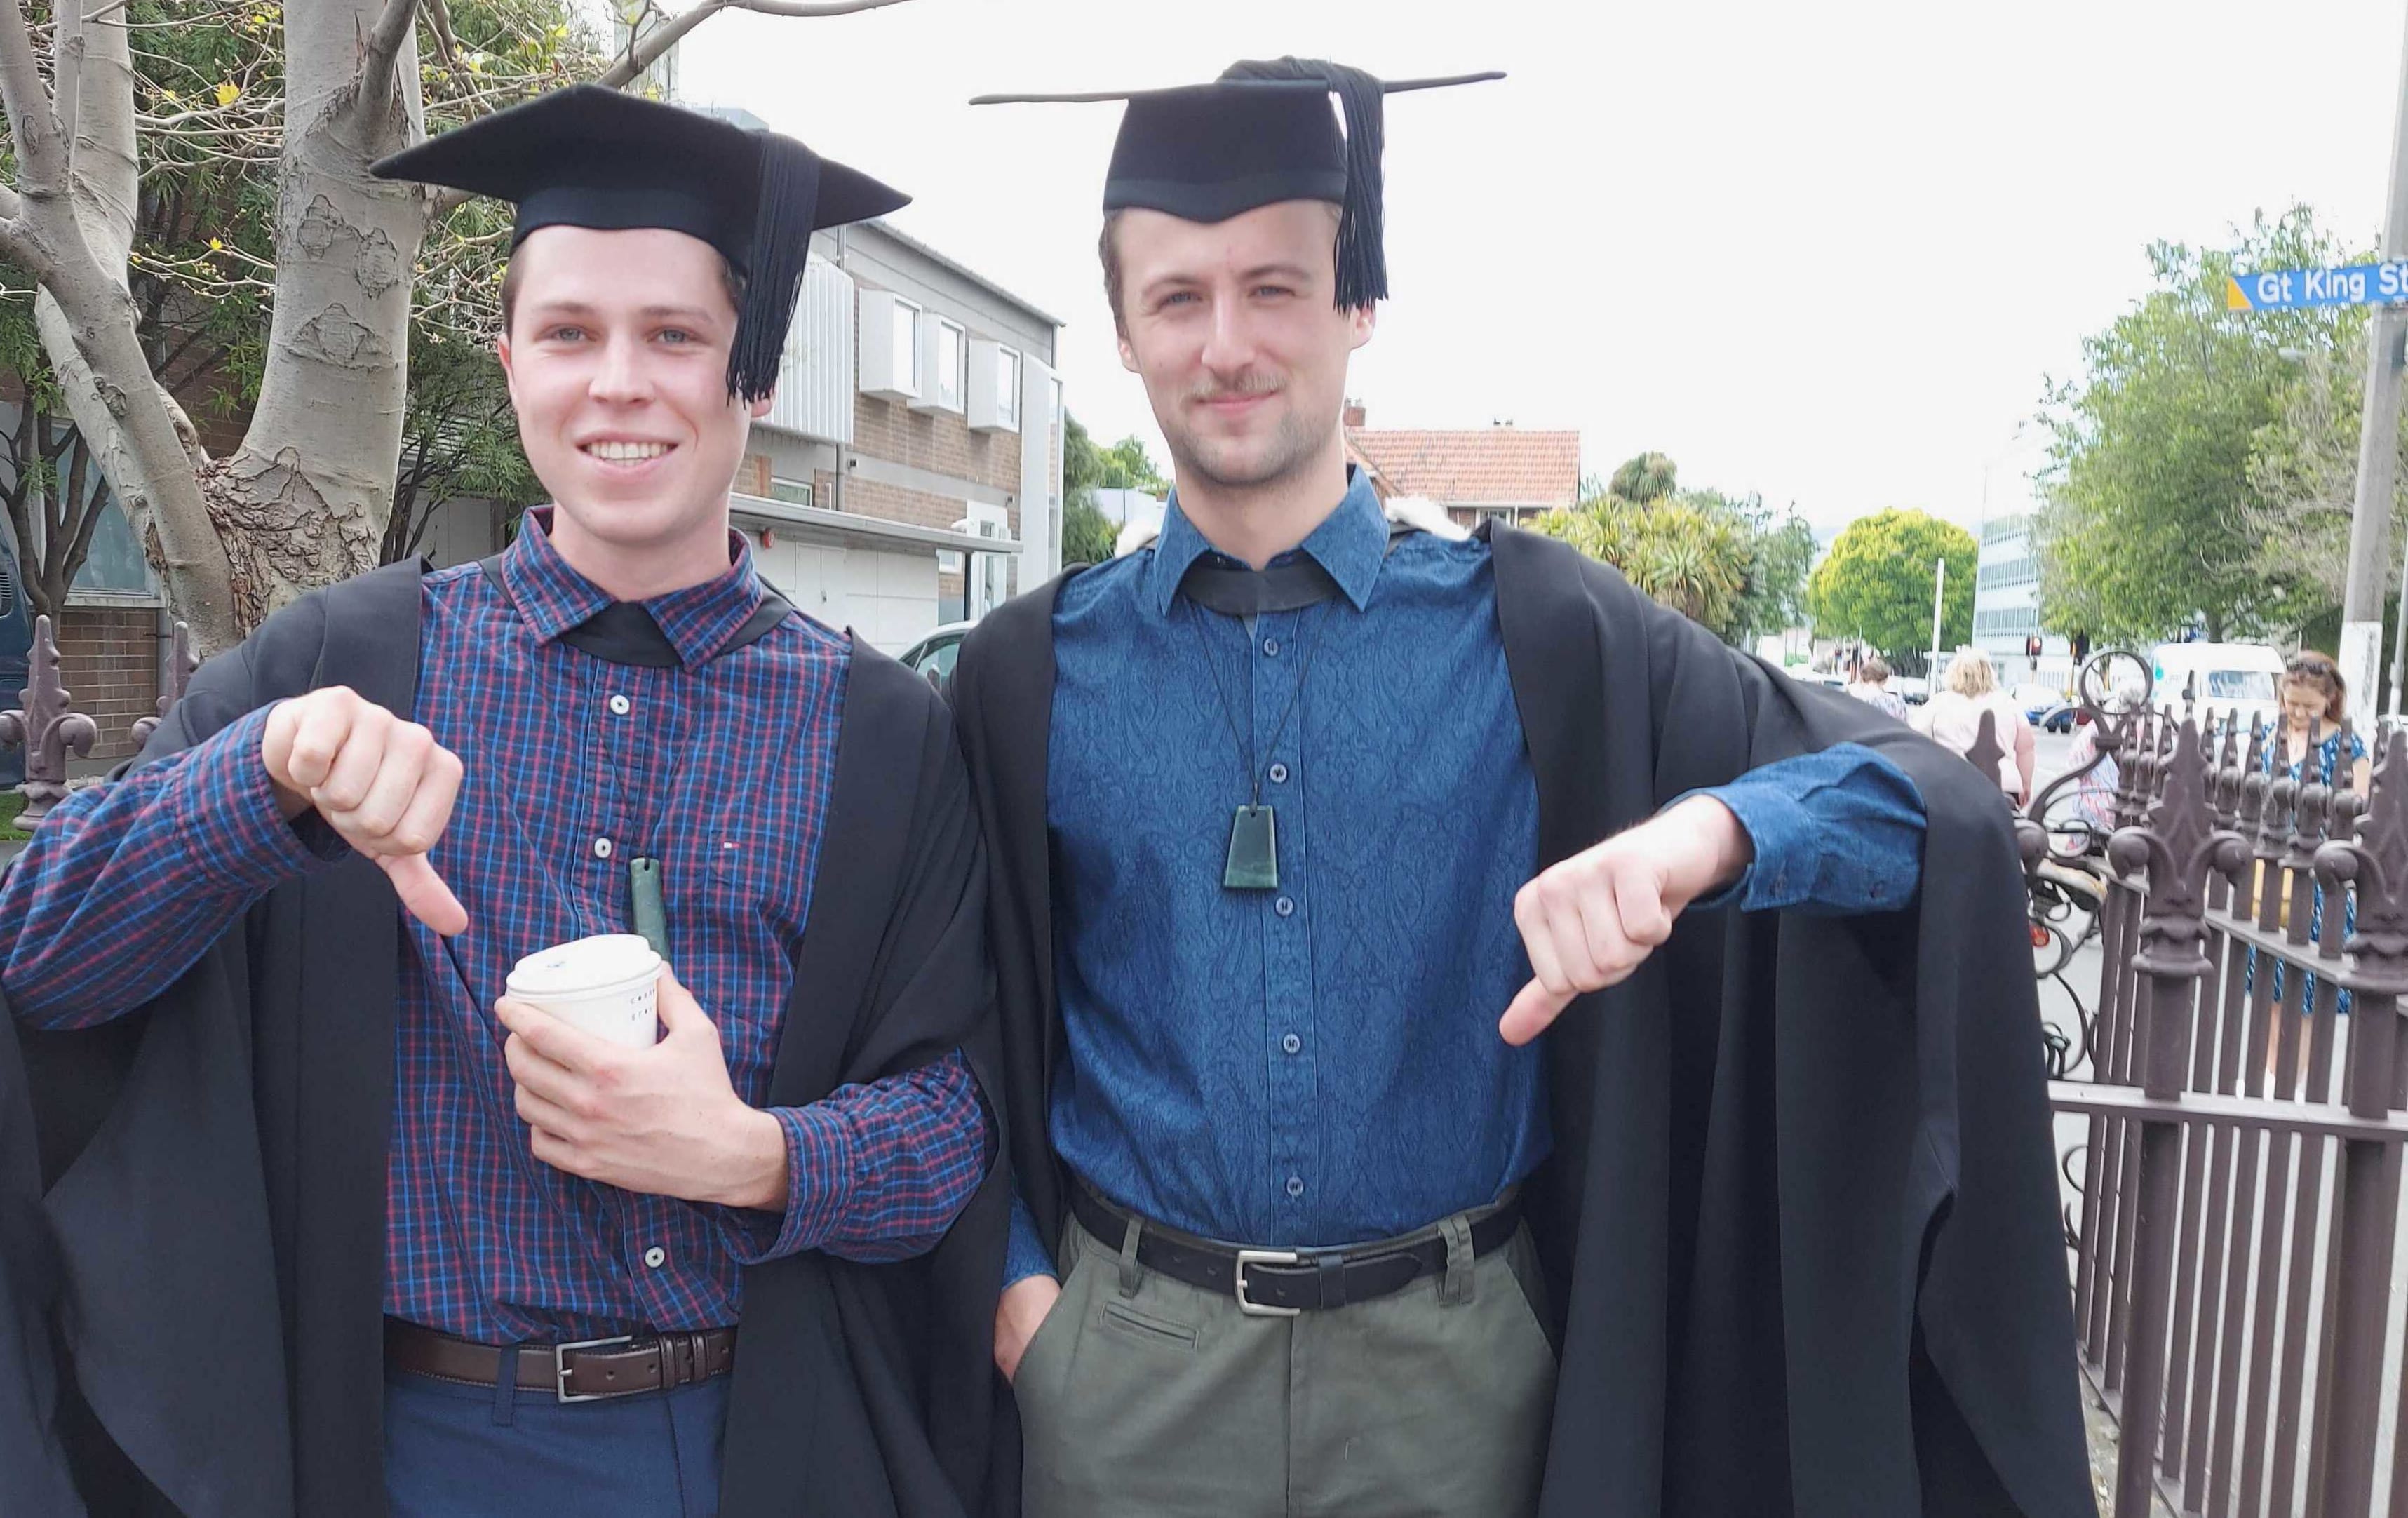 Ben shine and Thomas Bell are disappointed they won't be graduating today.